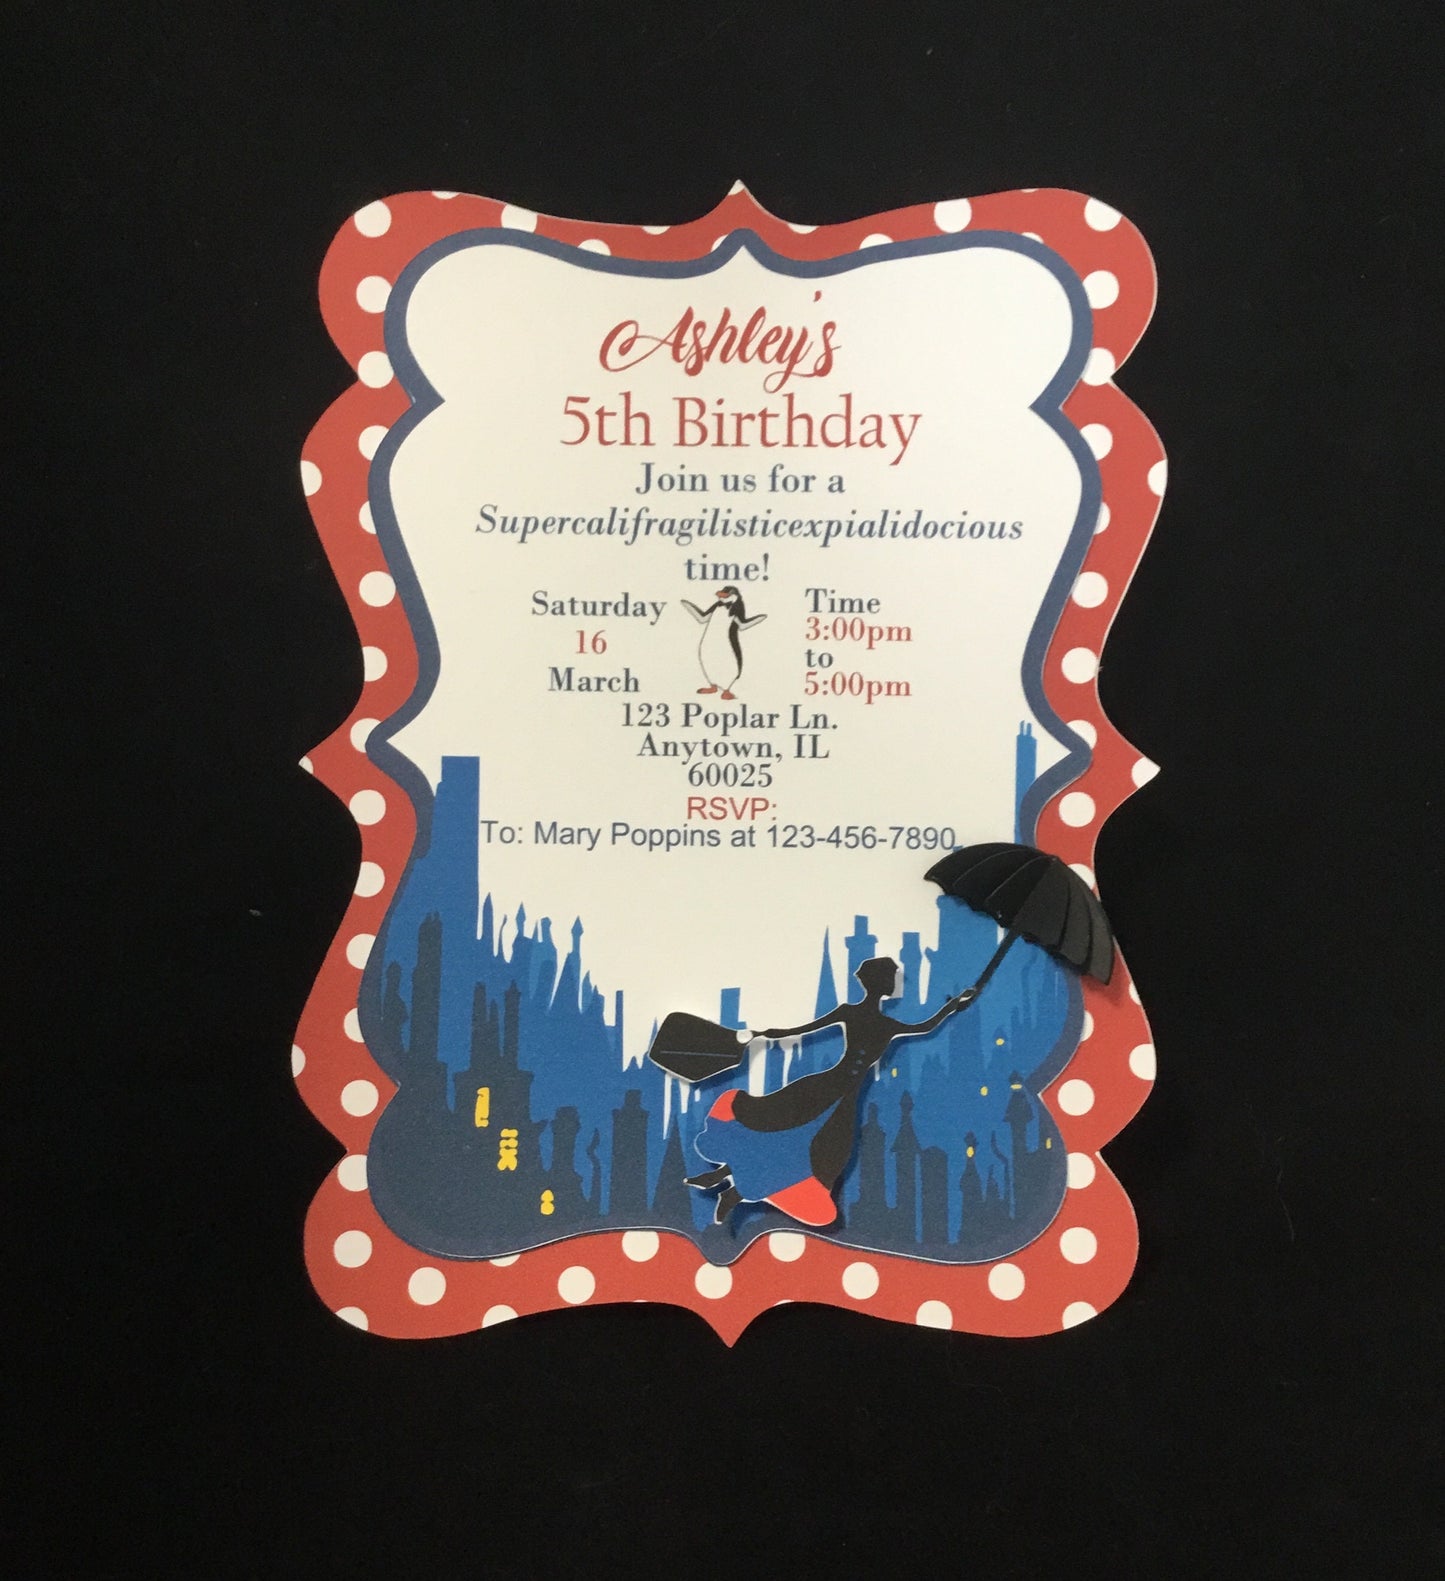 Mary Poppins Inspired Invitations/Personalized Mary Poppins Invites/12 Invitations with envelopes